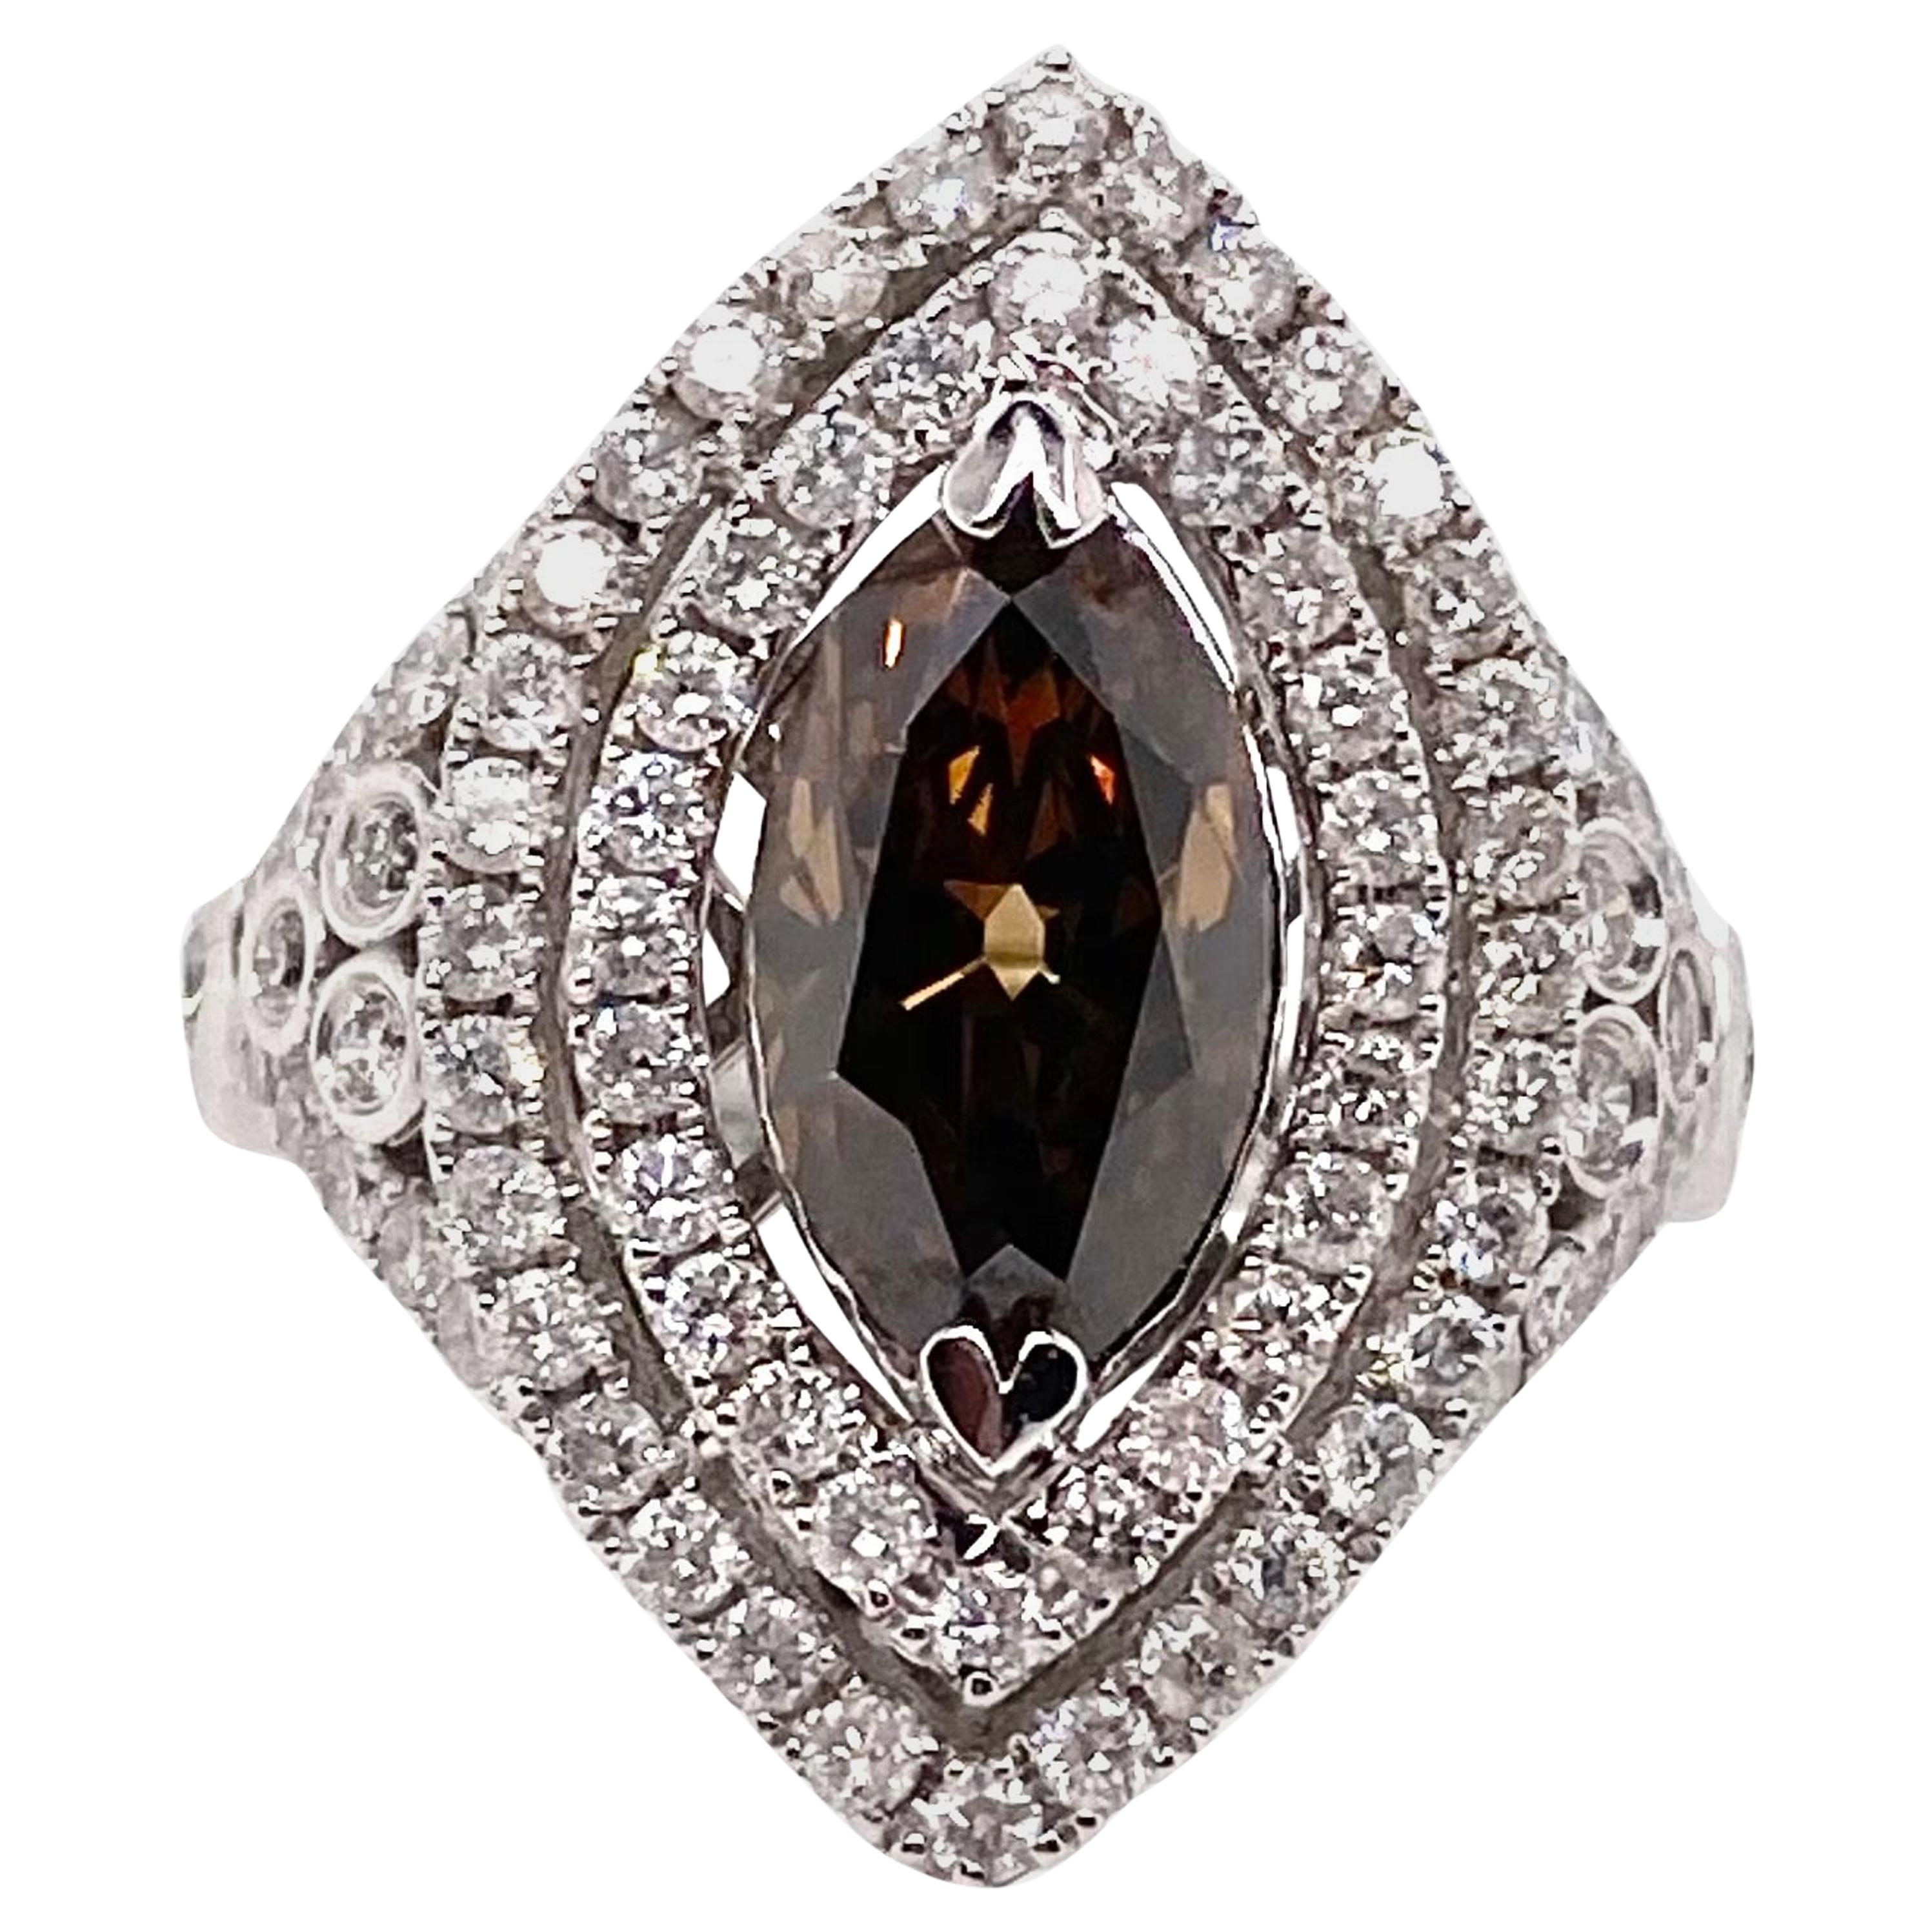 Ethonica GIA Certified Rare Fancy Brown Oval Diamond Ring in 14 Karat Gold